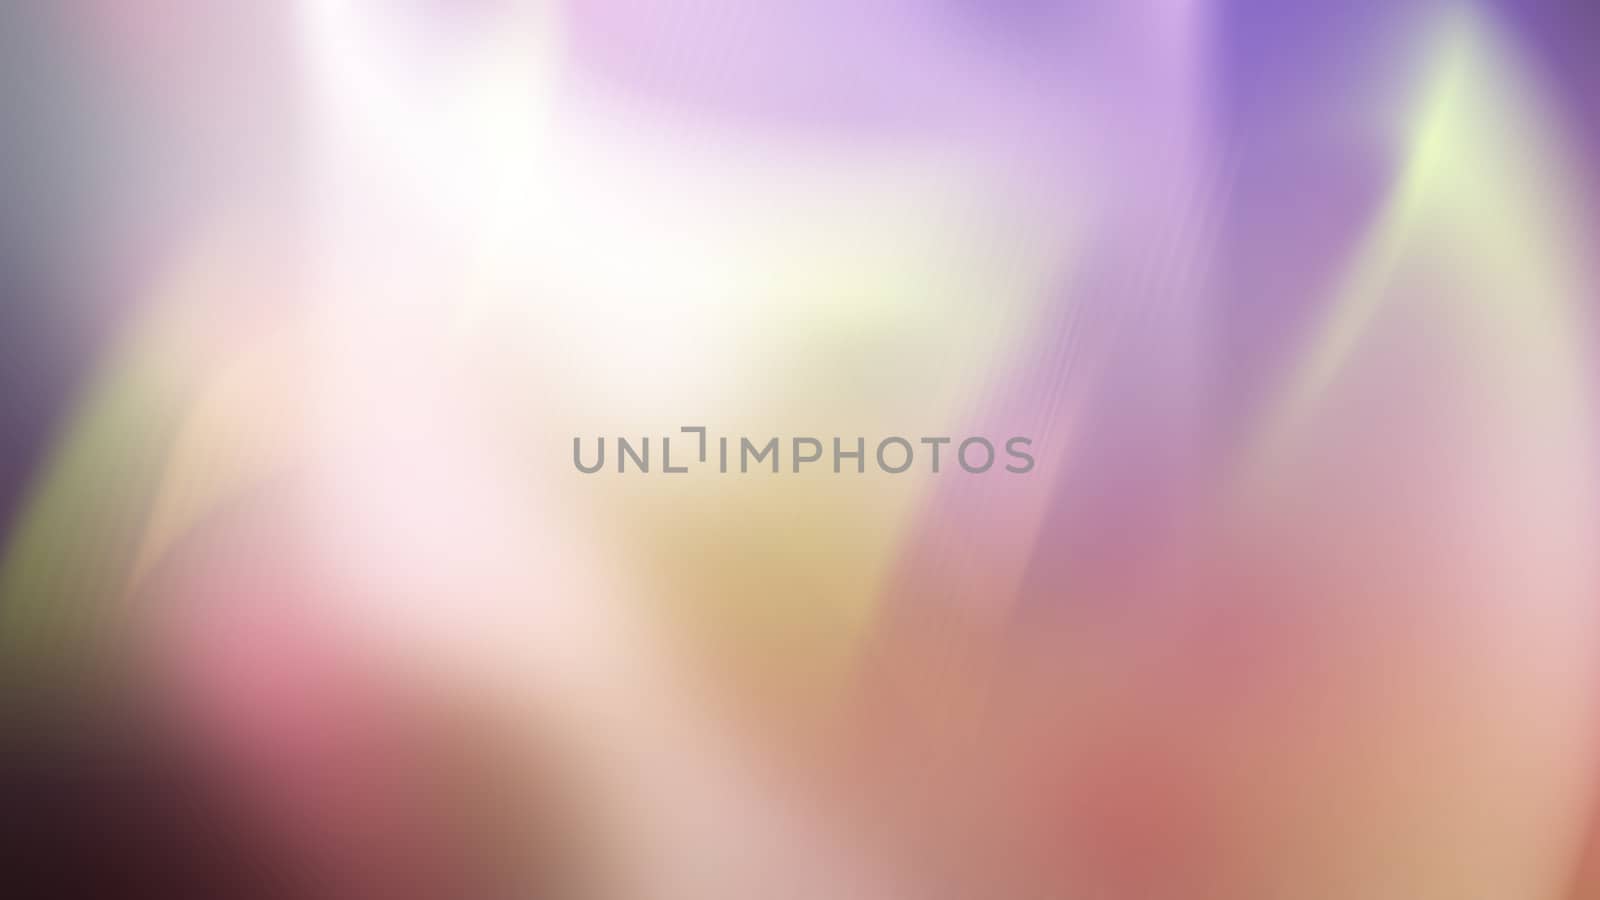 Calm background with beautiful pastel colors, 3d rendering background, picture for romantic and spring creative